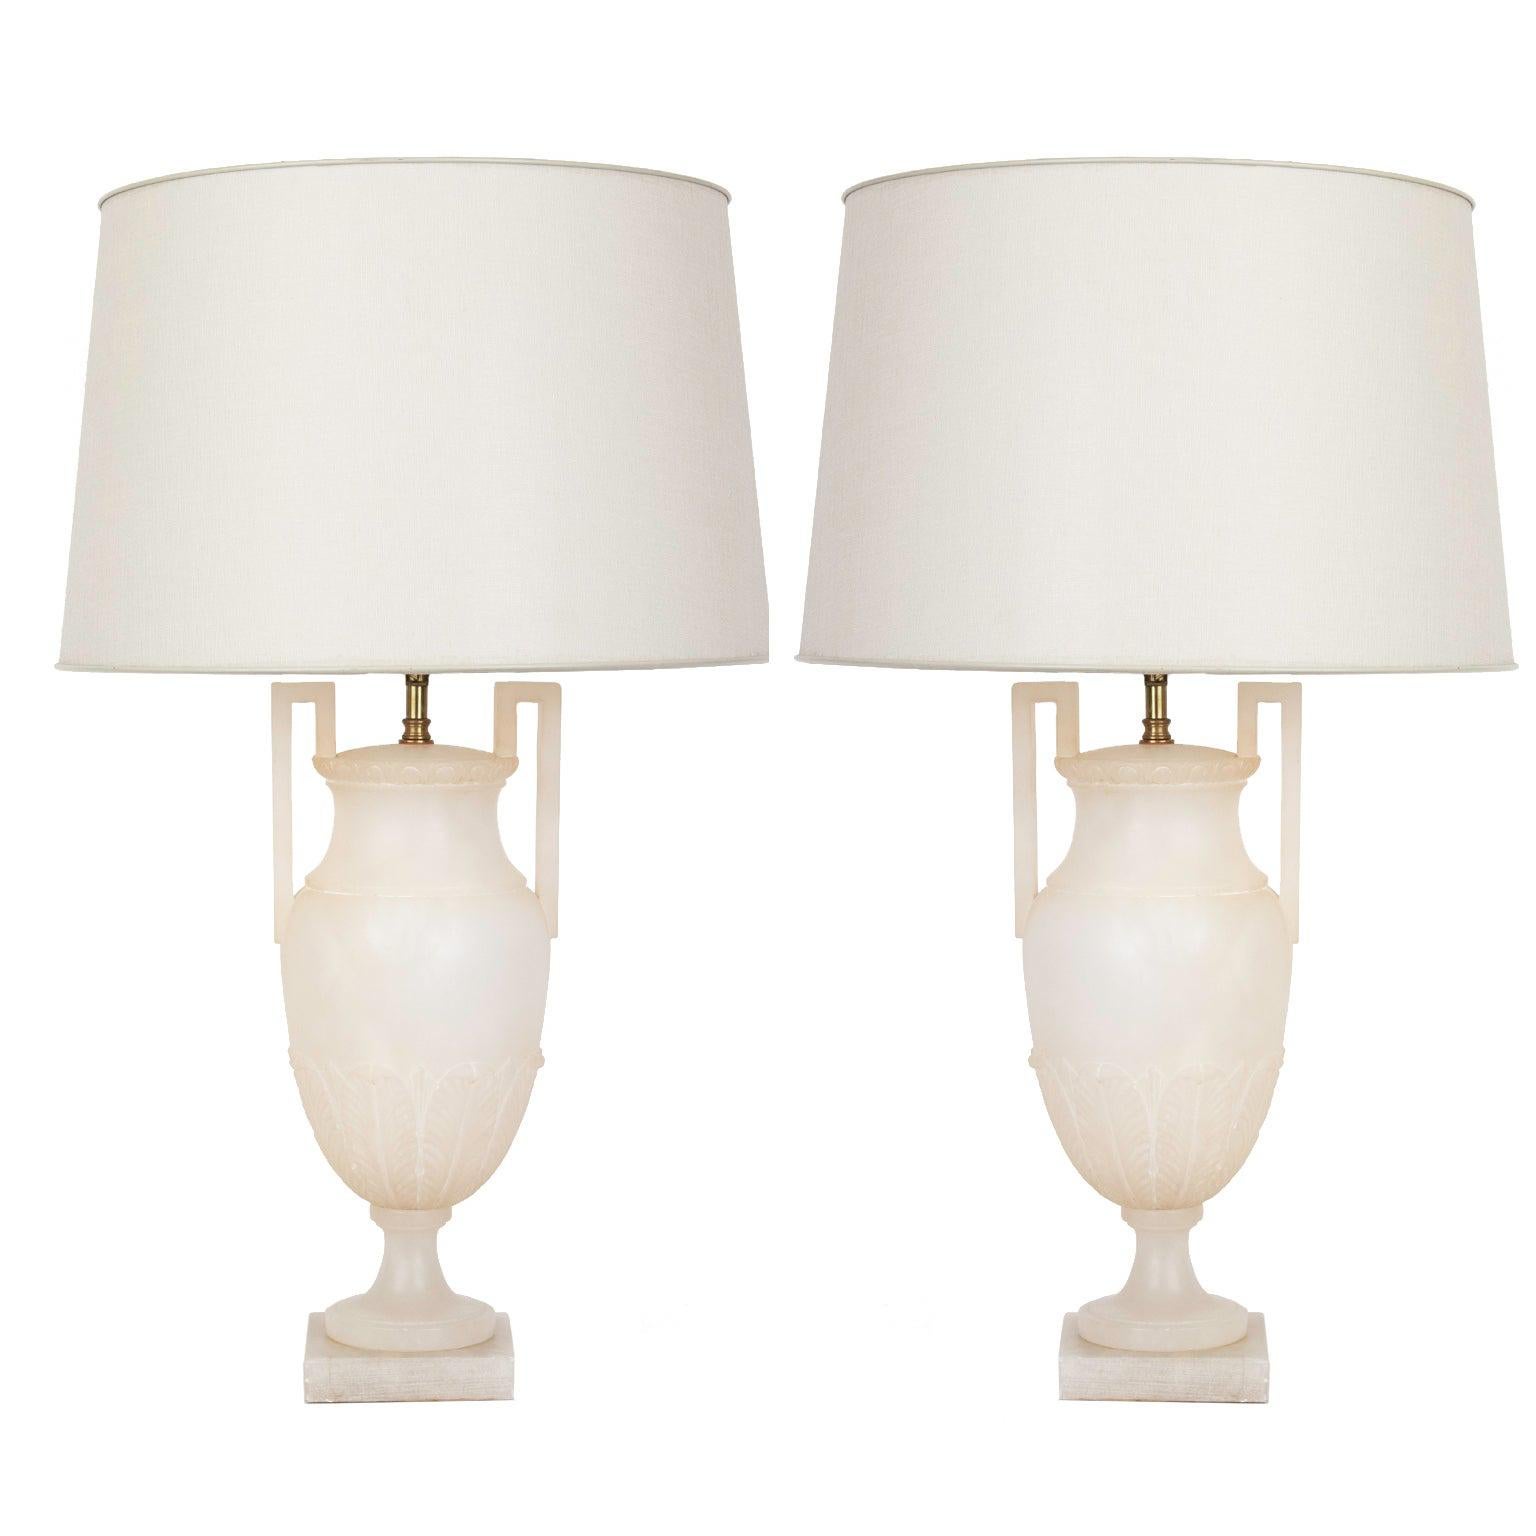 Pair of Midcentury Italian Neoclassical Style Alabaster Urn Table Lamps